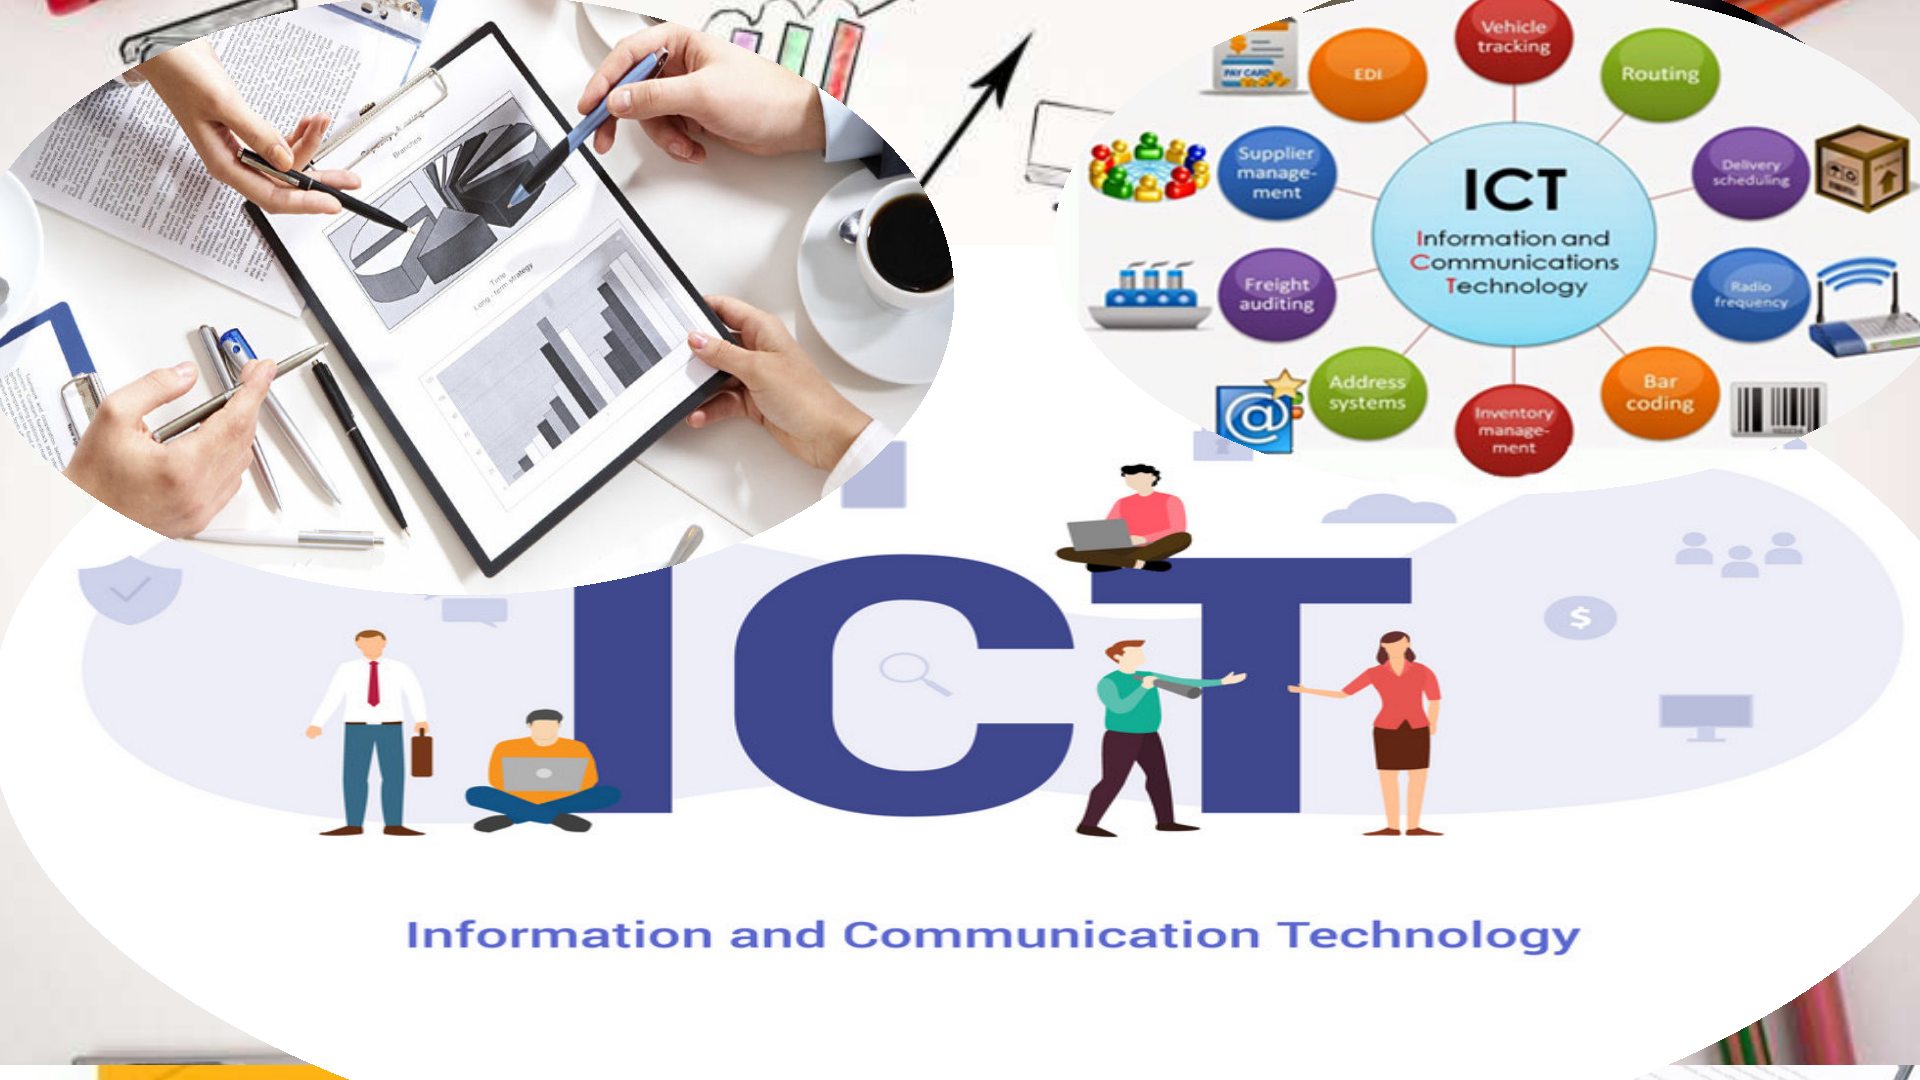 Information Technology and Communications